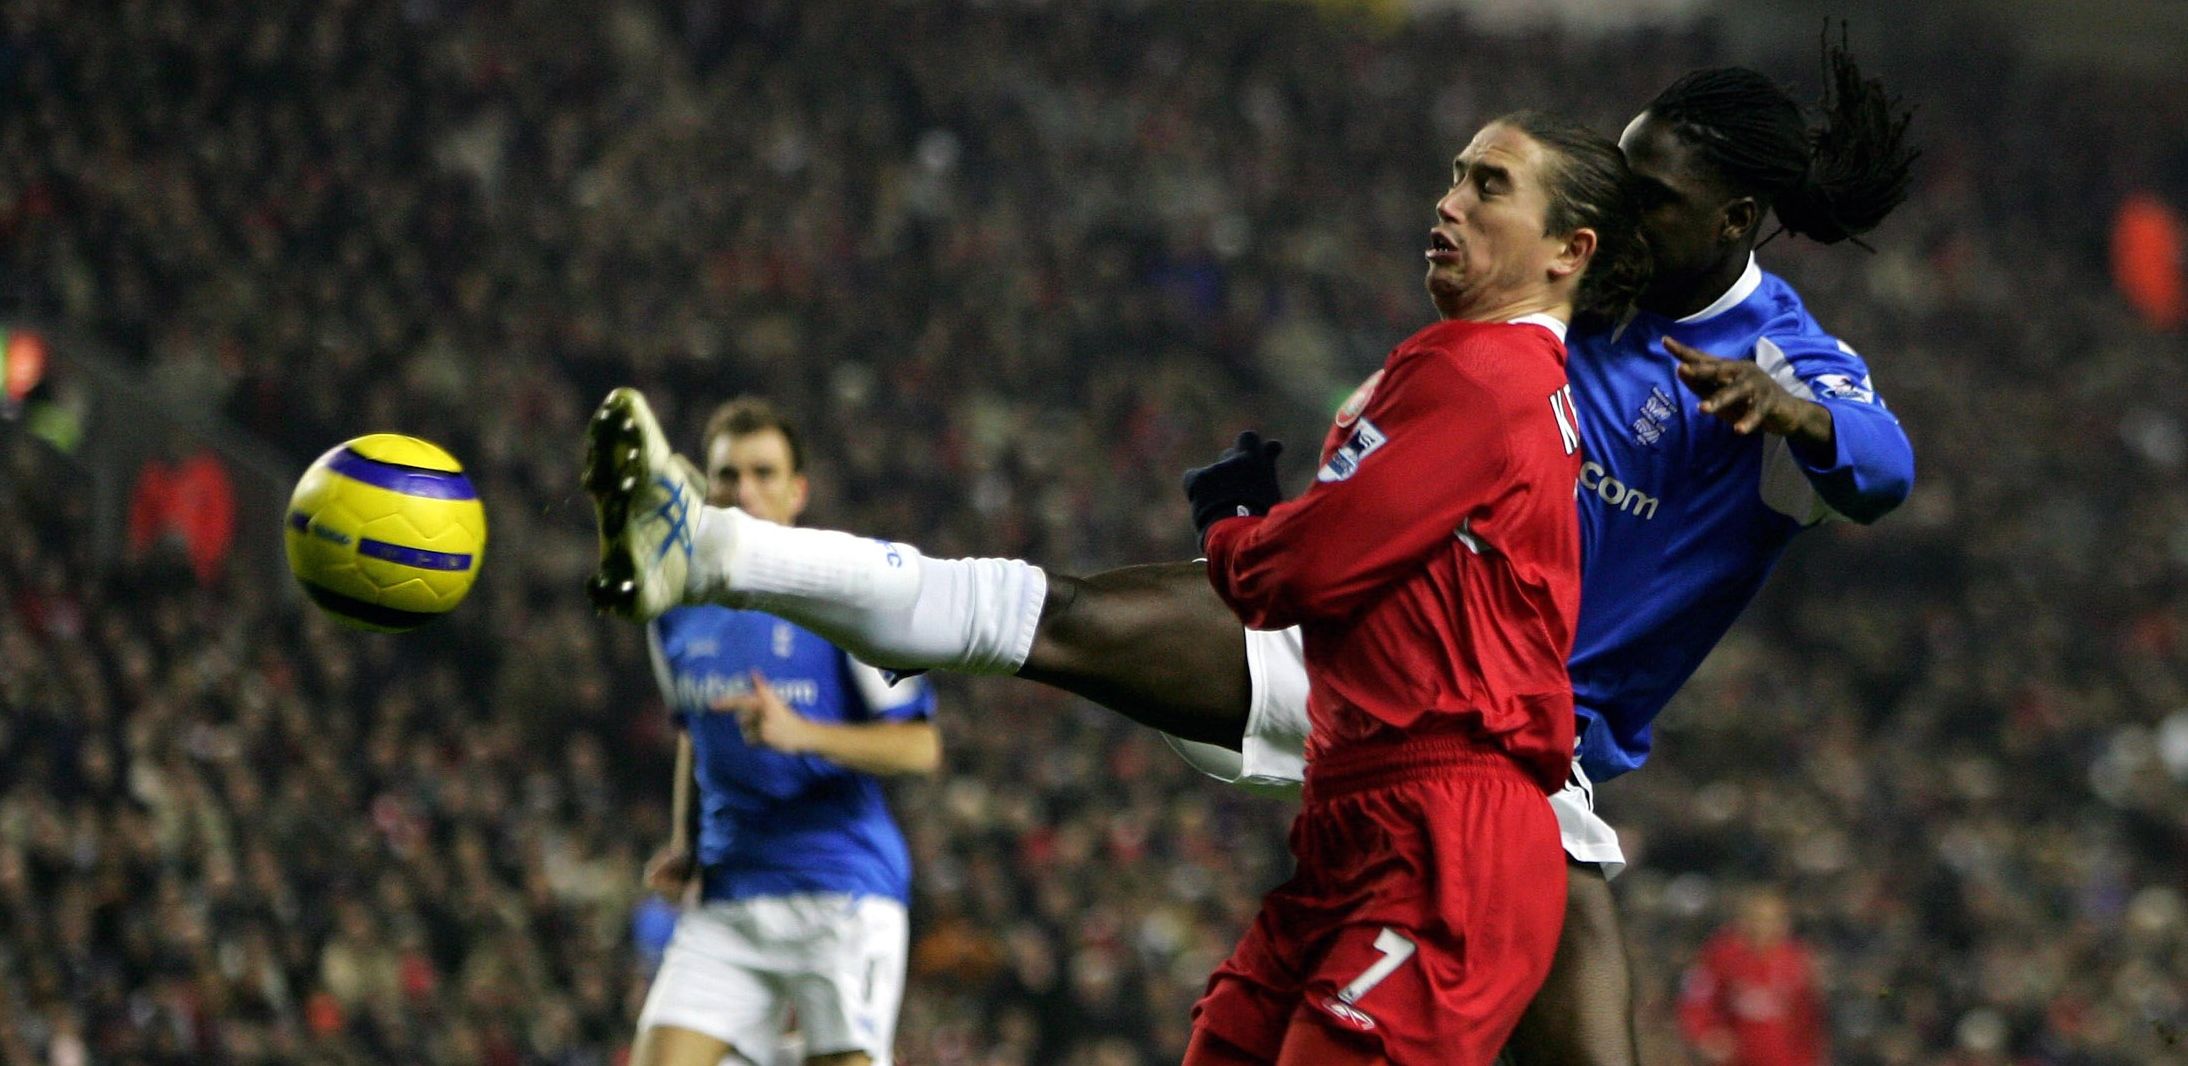 Premiership 1/2/2006 Liverpool vs Birmingham City Mario Melchiot of Birmingham stretches his leg out to get the ball away from Harry Kewell of Liverpool Mandatory Credit ©INPHO/Getty Images